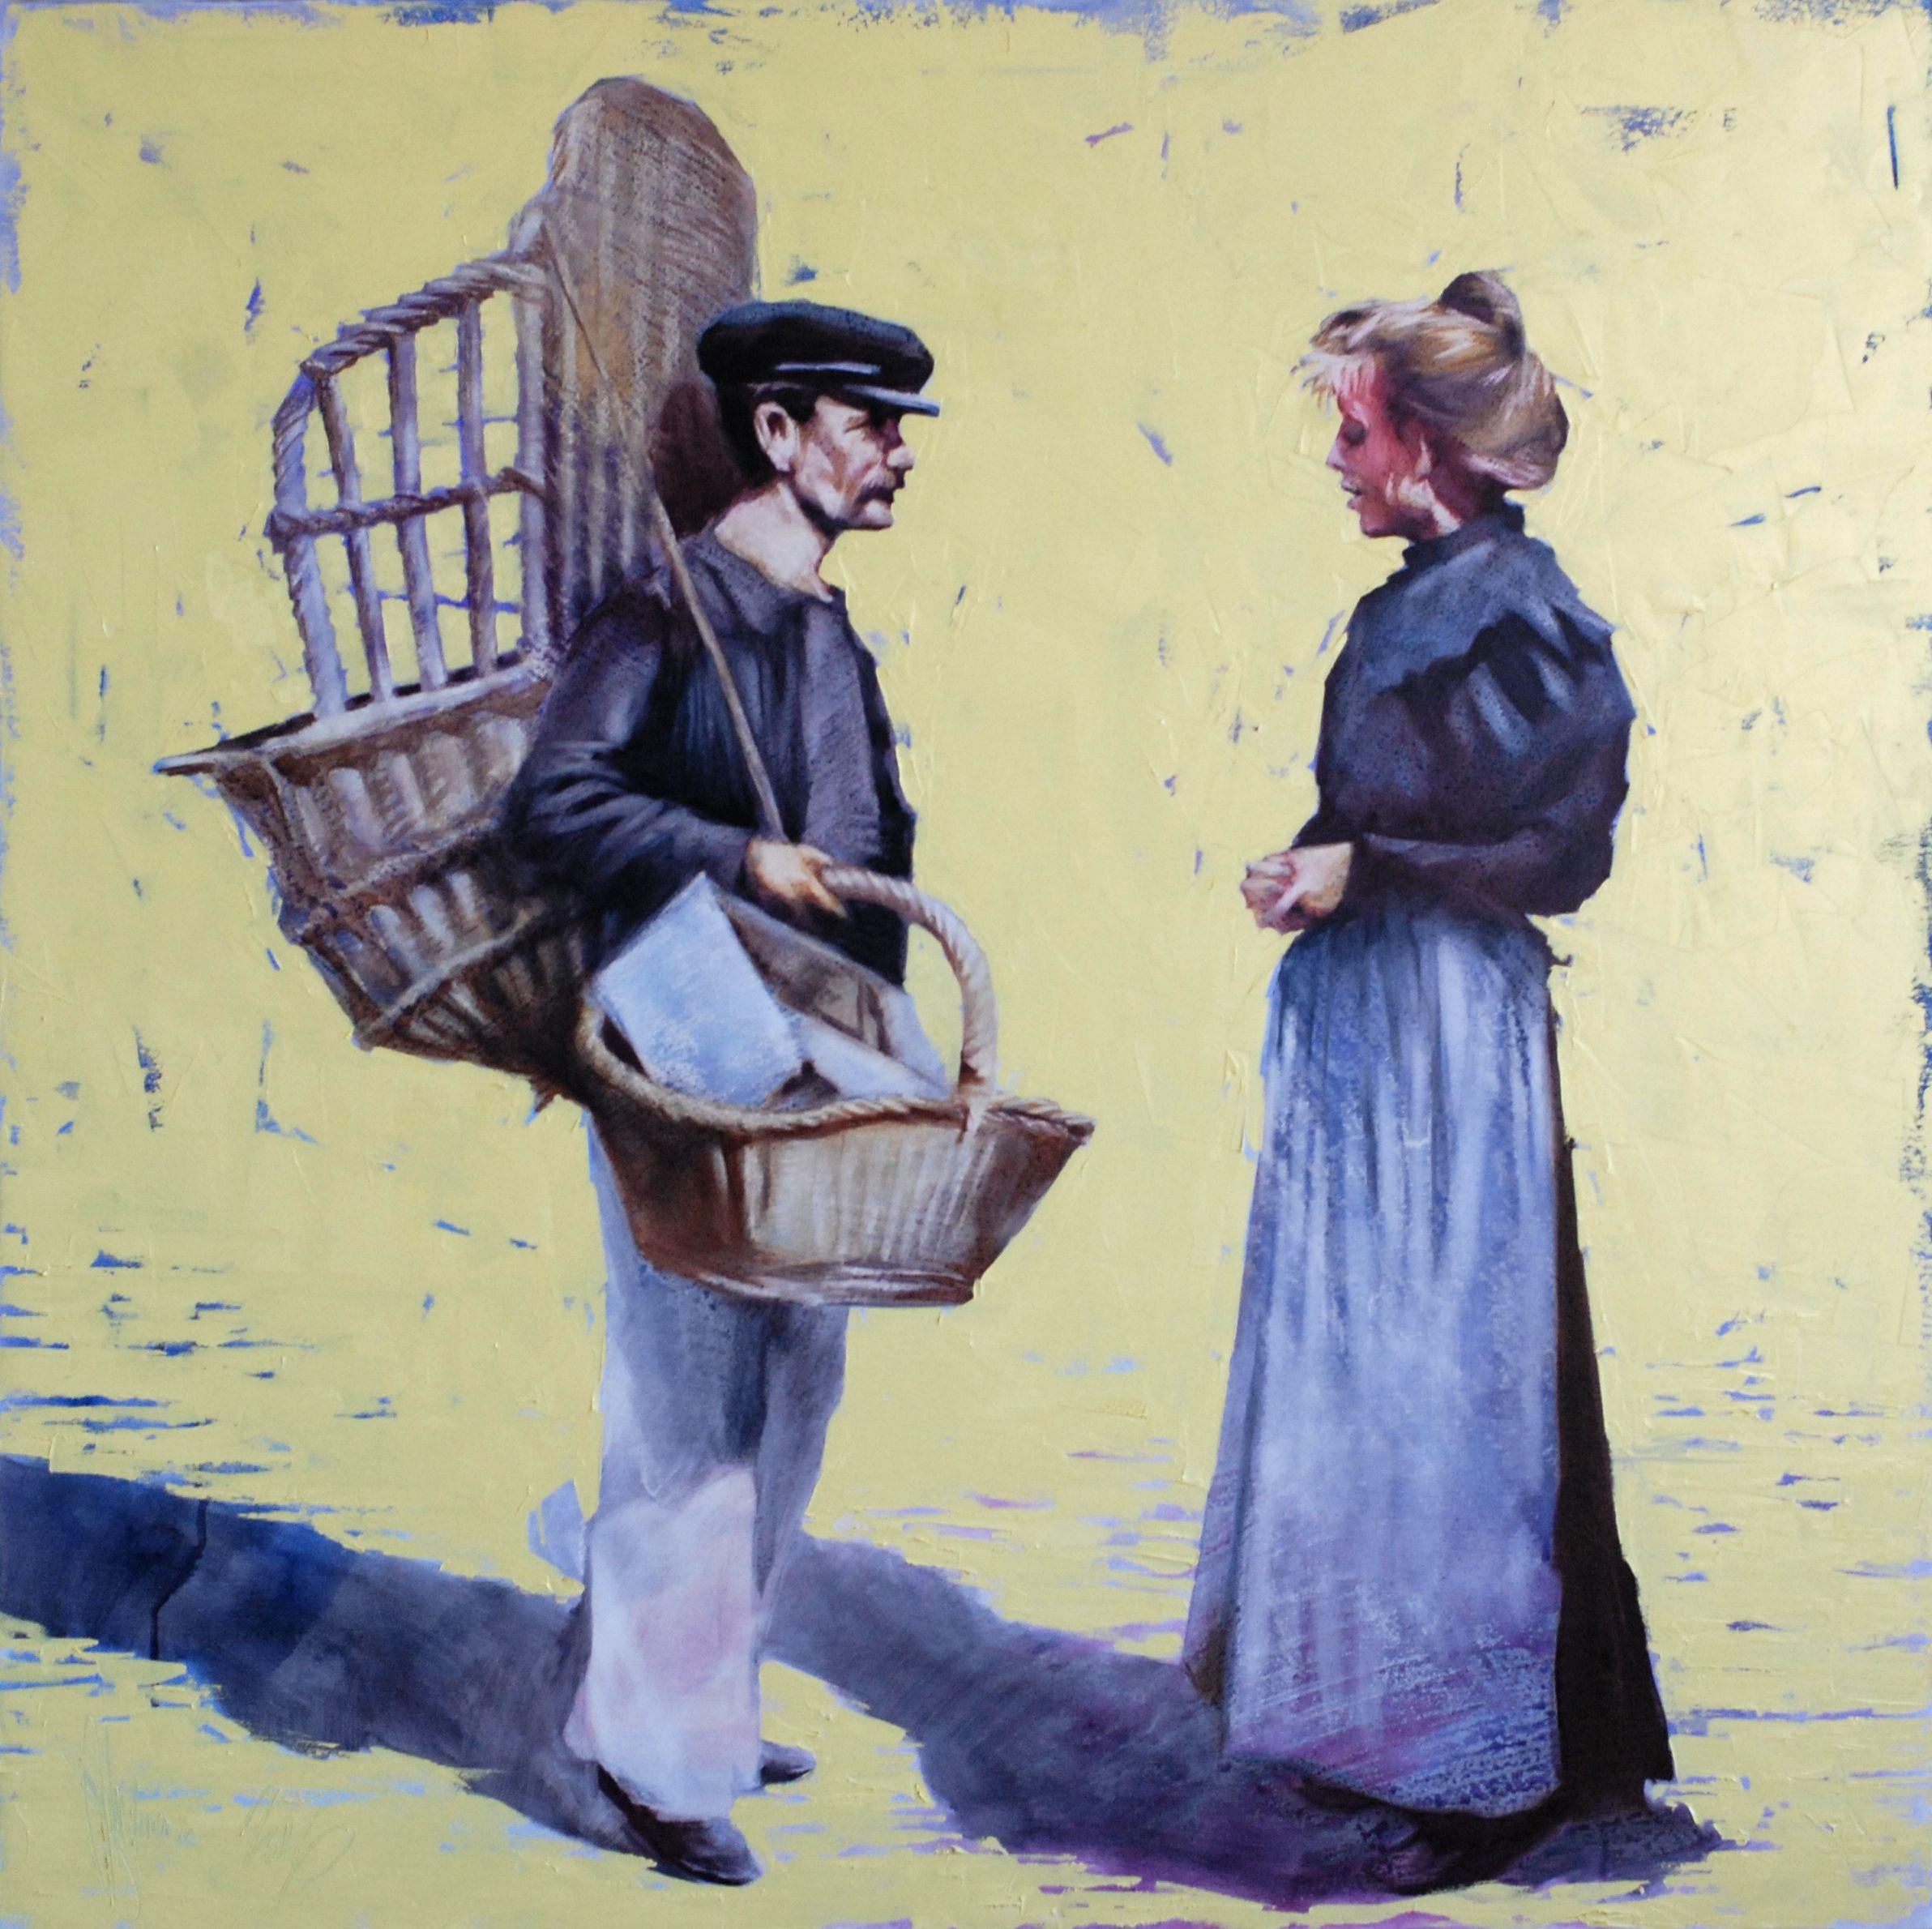 High Noon. Marseilles. He sold several baskets in the morning and now it is necessary to bring only 2 last order. Good day. You can chat with the laundress from the neighboring street. In the evening, have a drink with the boys.  The picture is made